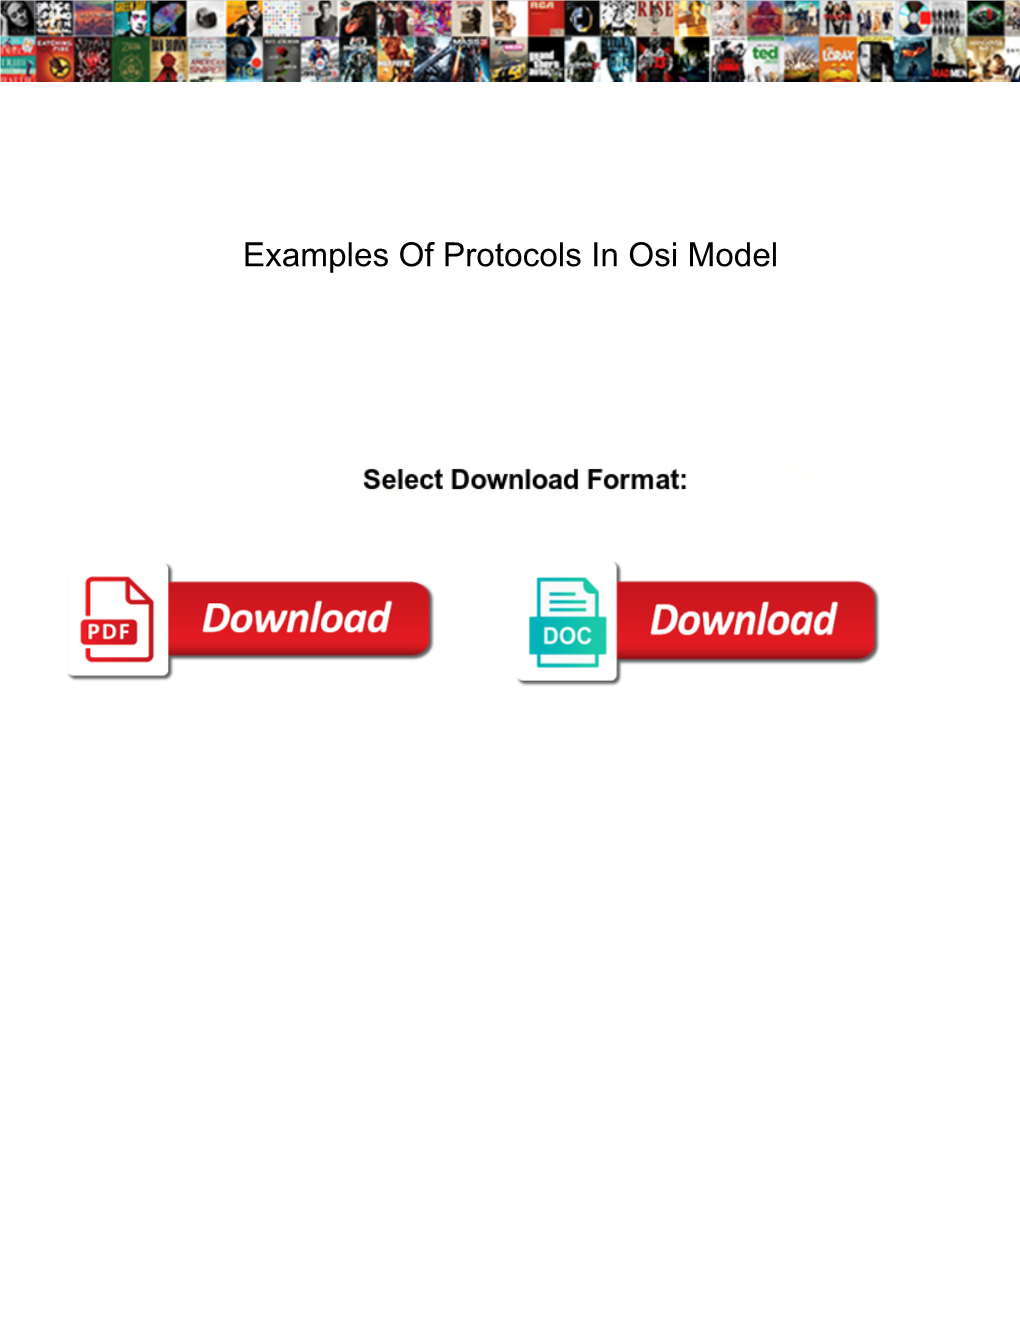 Examples of Protocols in Osi Model